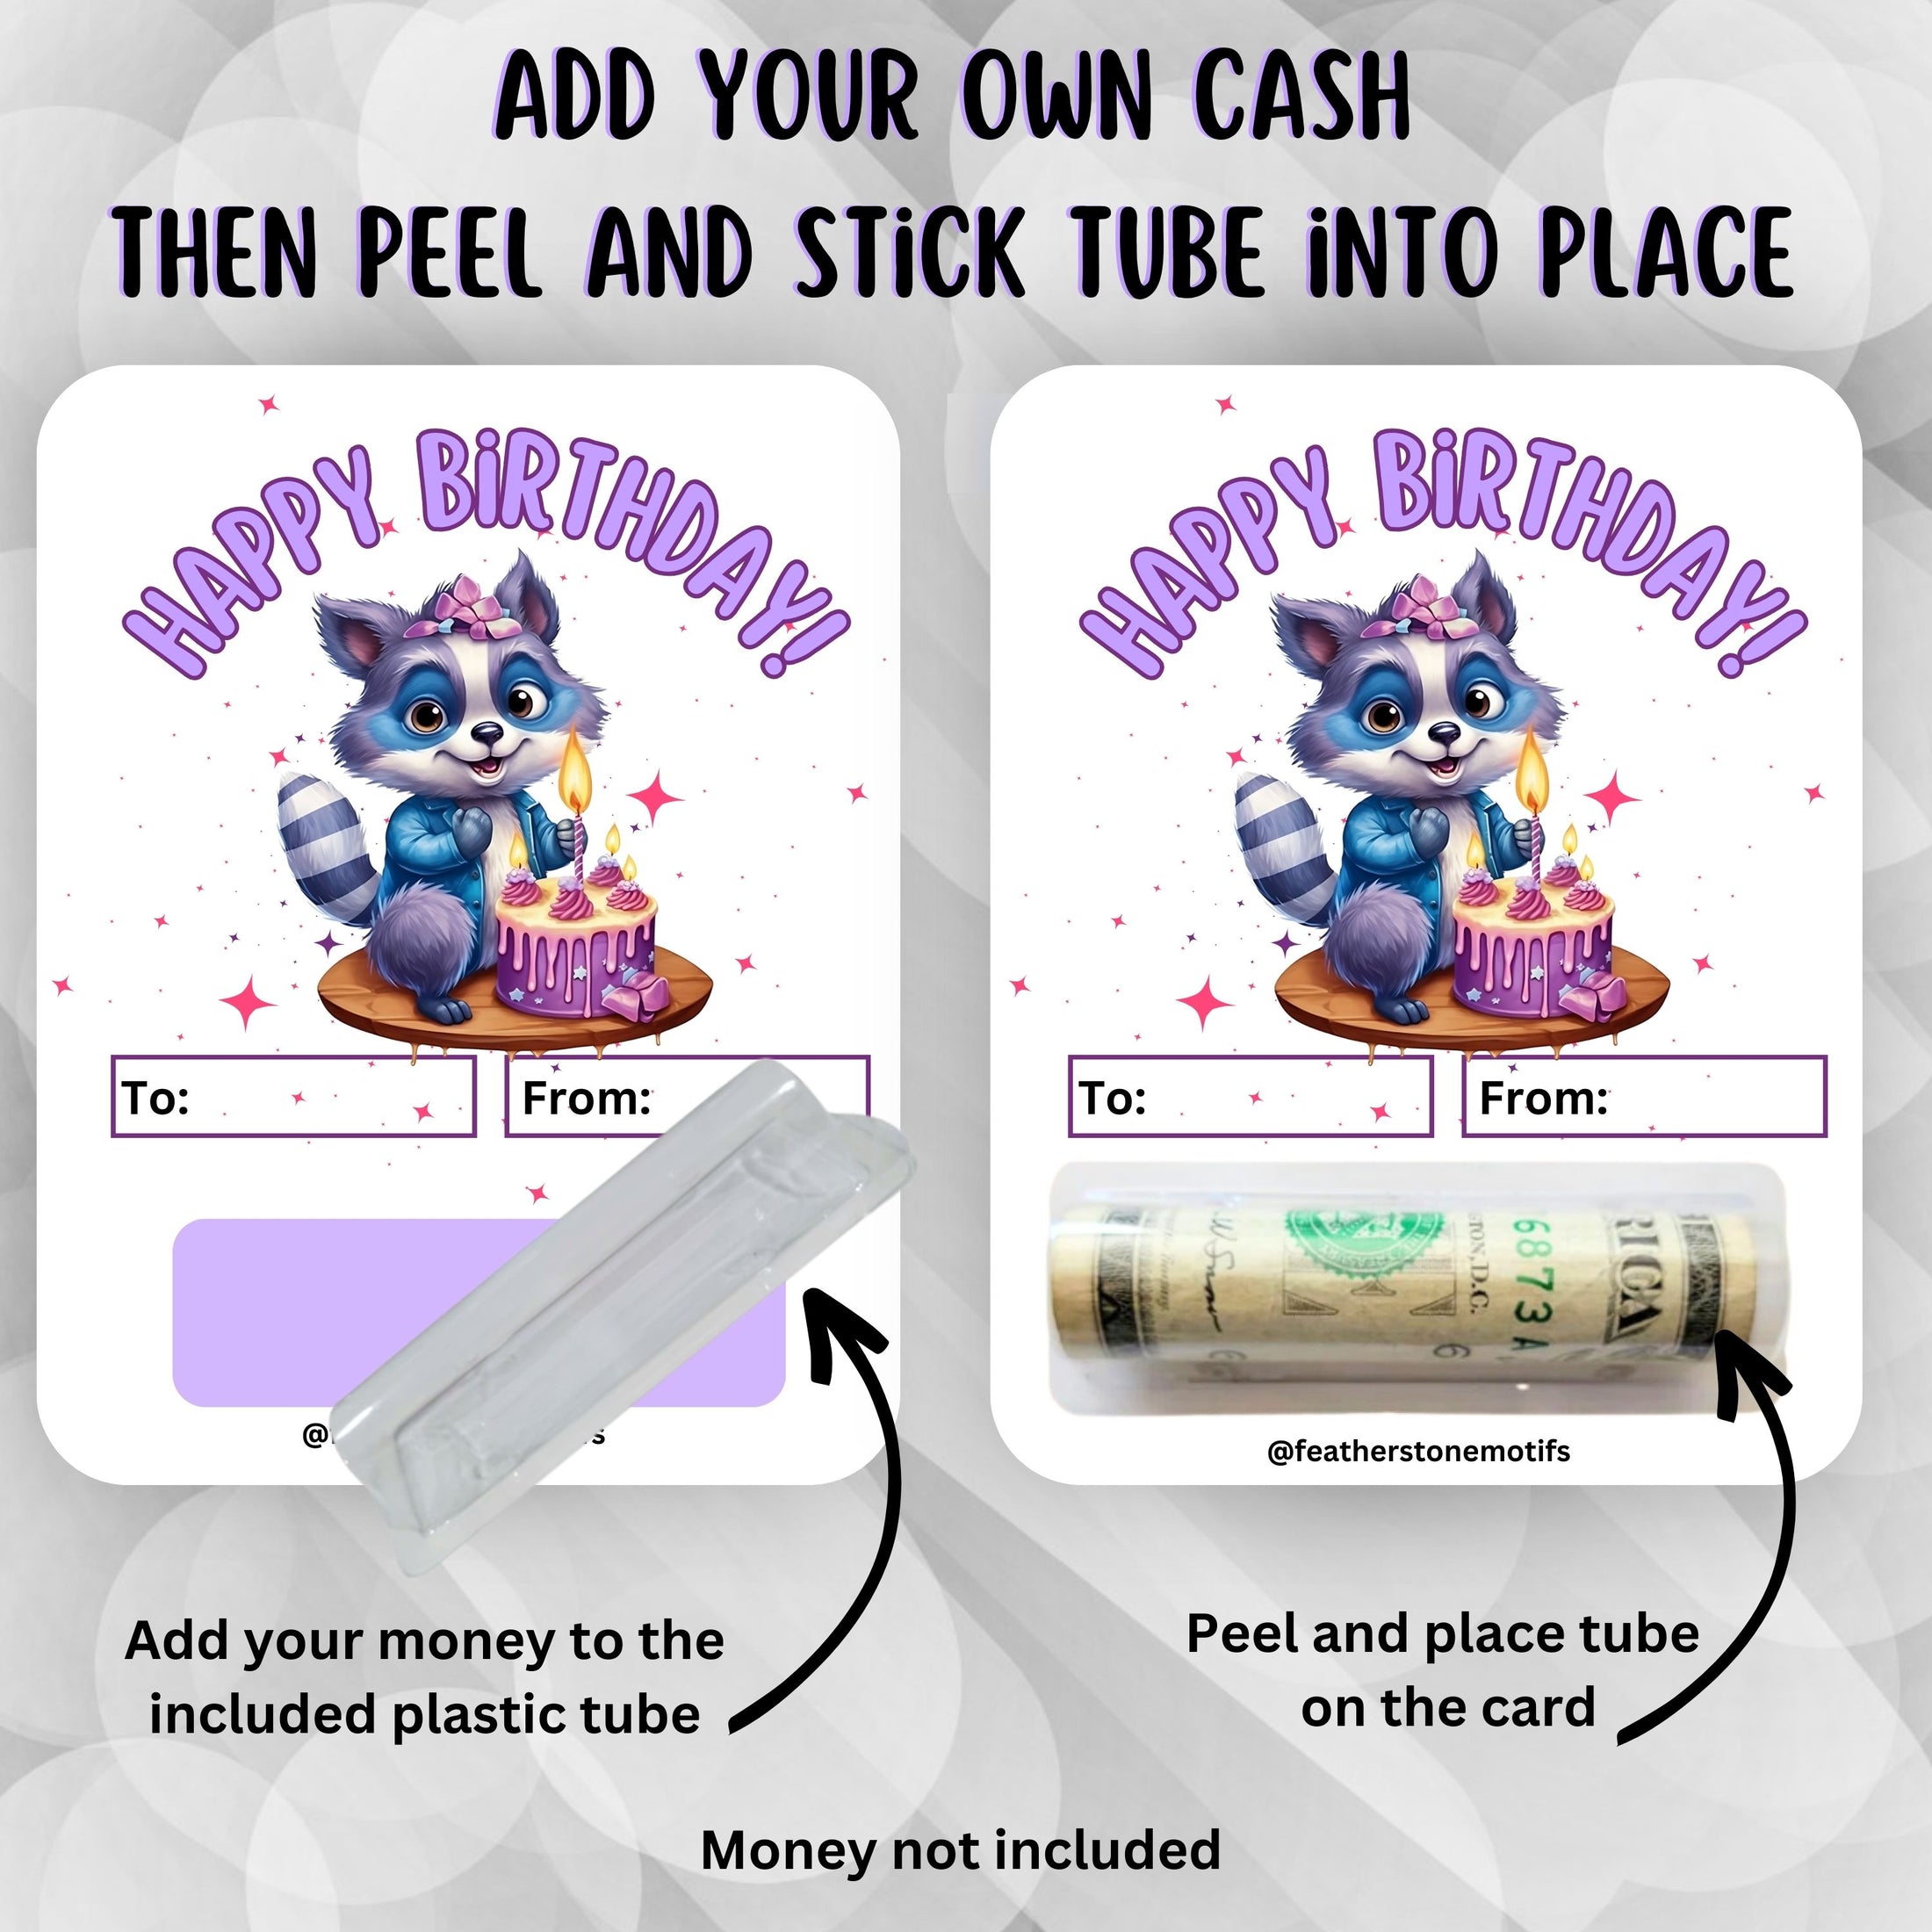 This image shows how to attach the money tube to the Raccoon Birthday money card.